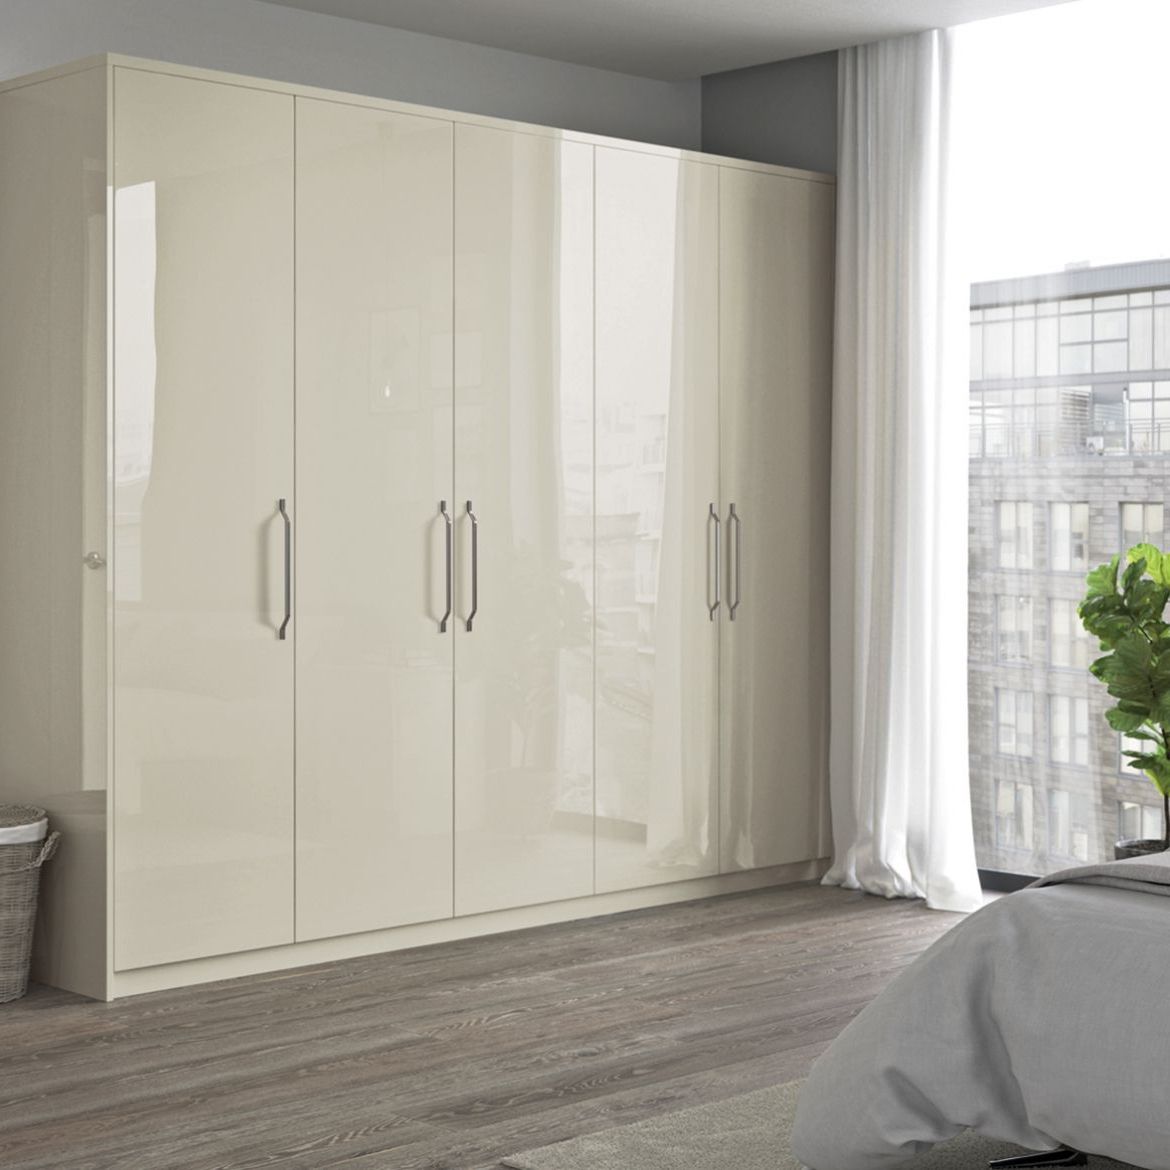 Reflections Wardrobe | Cash & Carry Kitchens Intended For White Gloss Wardrobes (View 10 of 20)